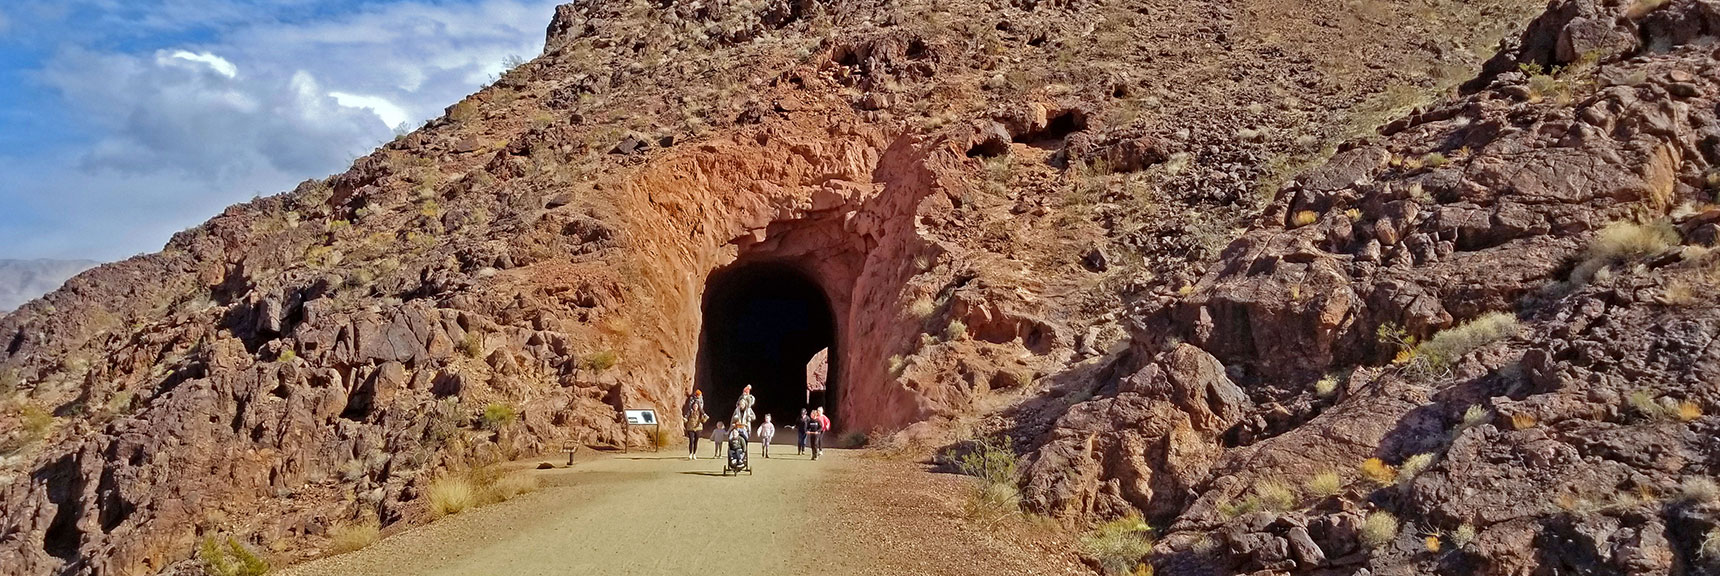 Hikers from Toddlers to Seniors, Along with Serious Runners, Enjoy the Trail | Historic Railroad Trail | Lake Mead National Recreation Area, Nevada